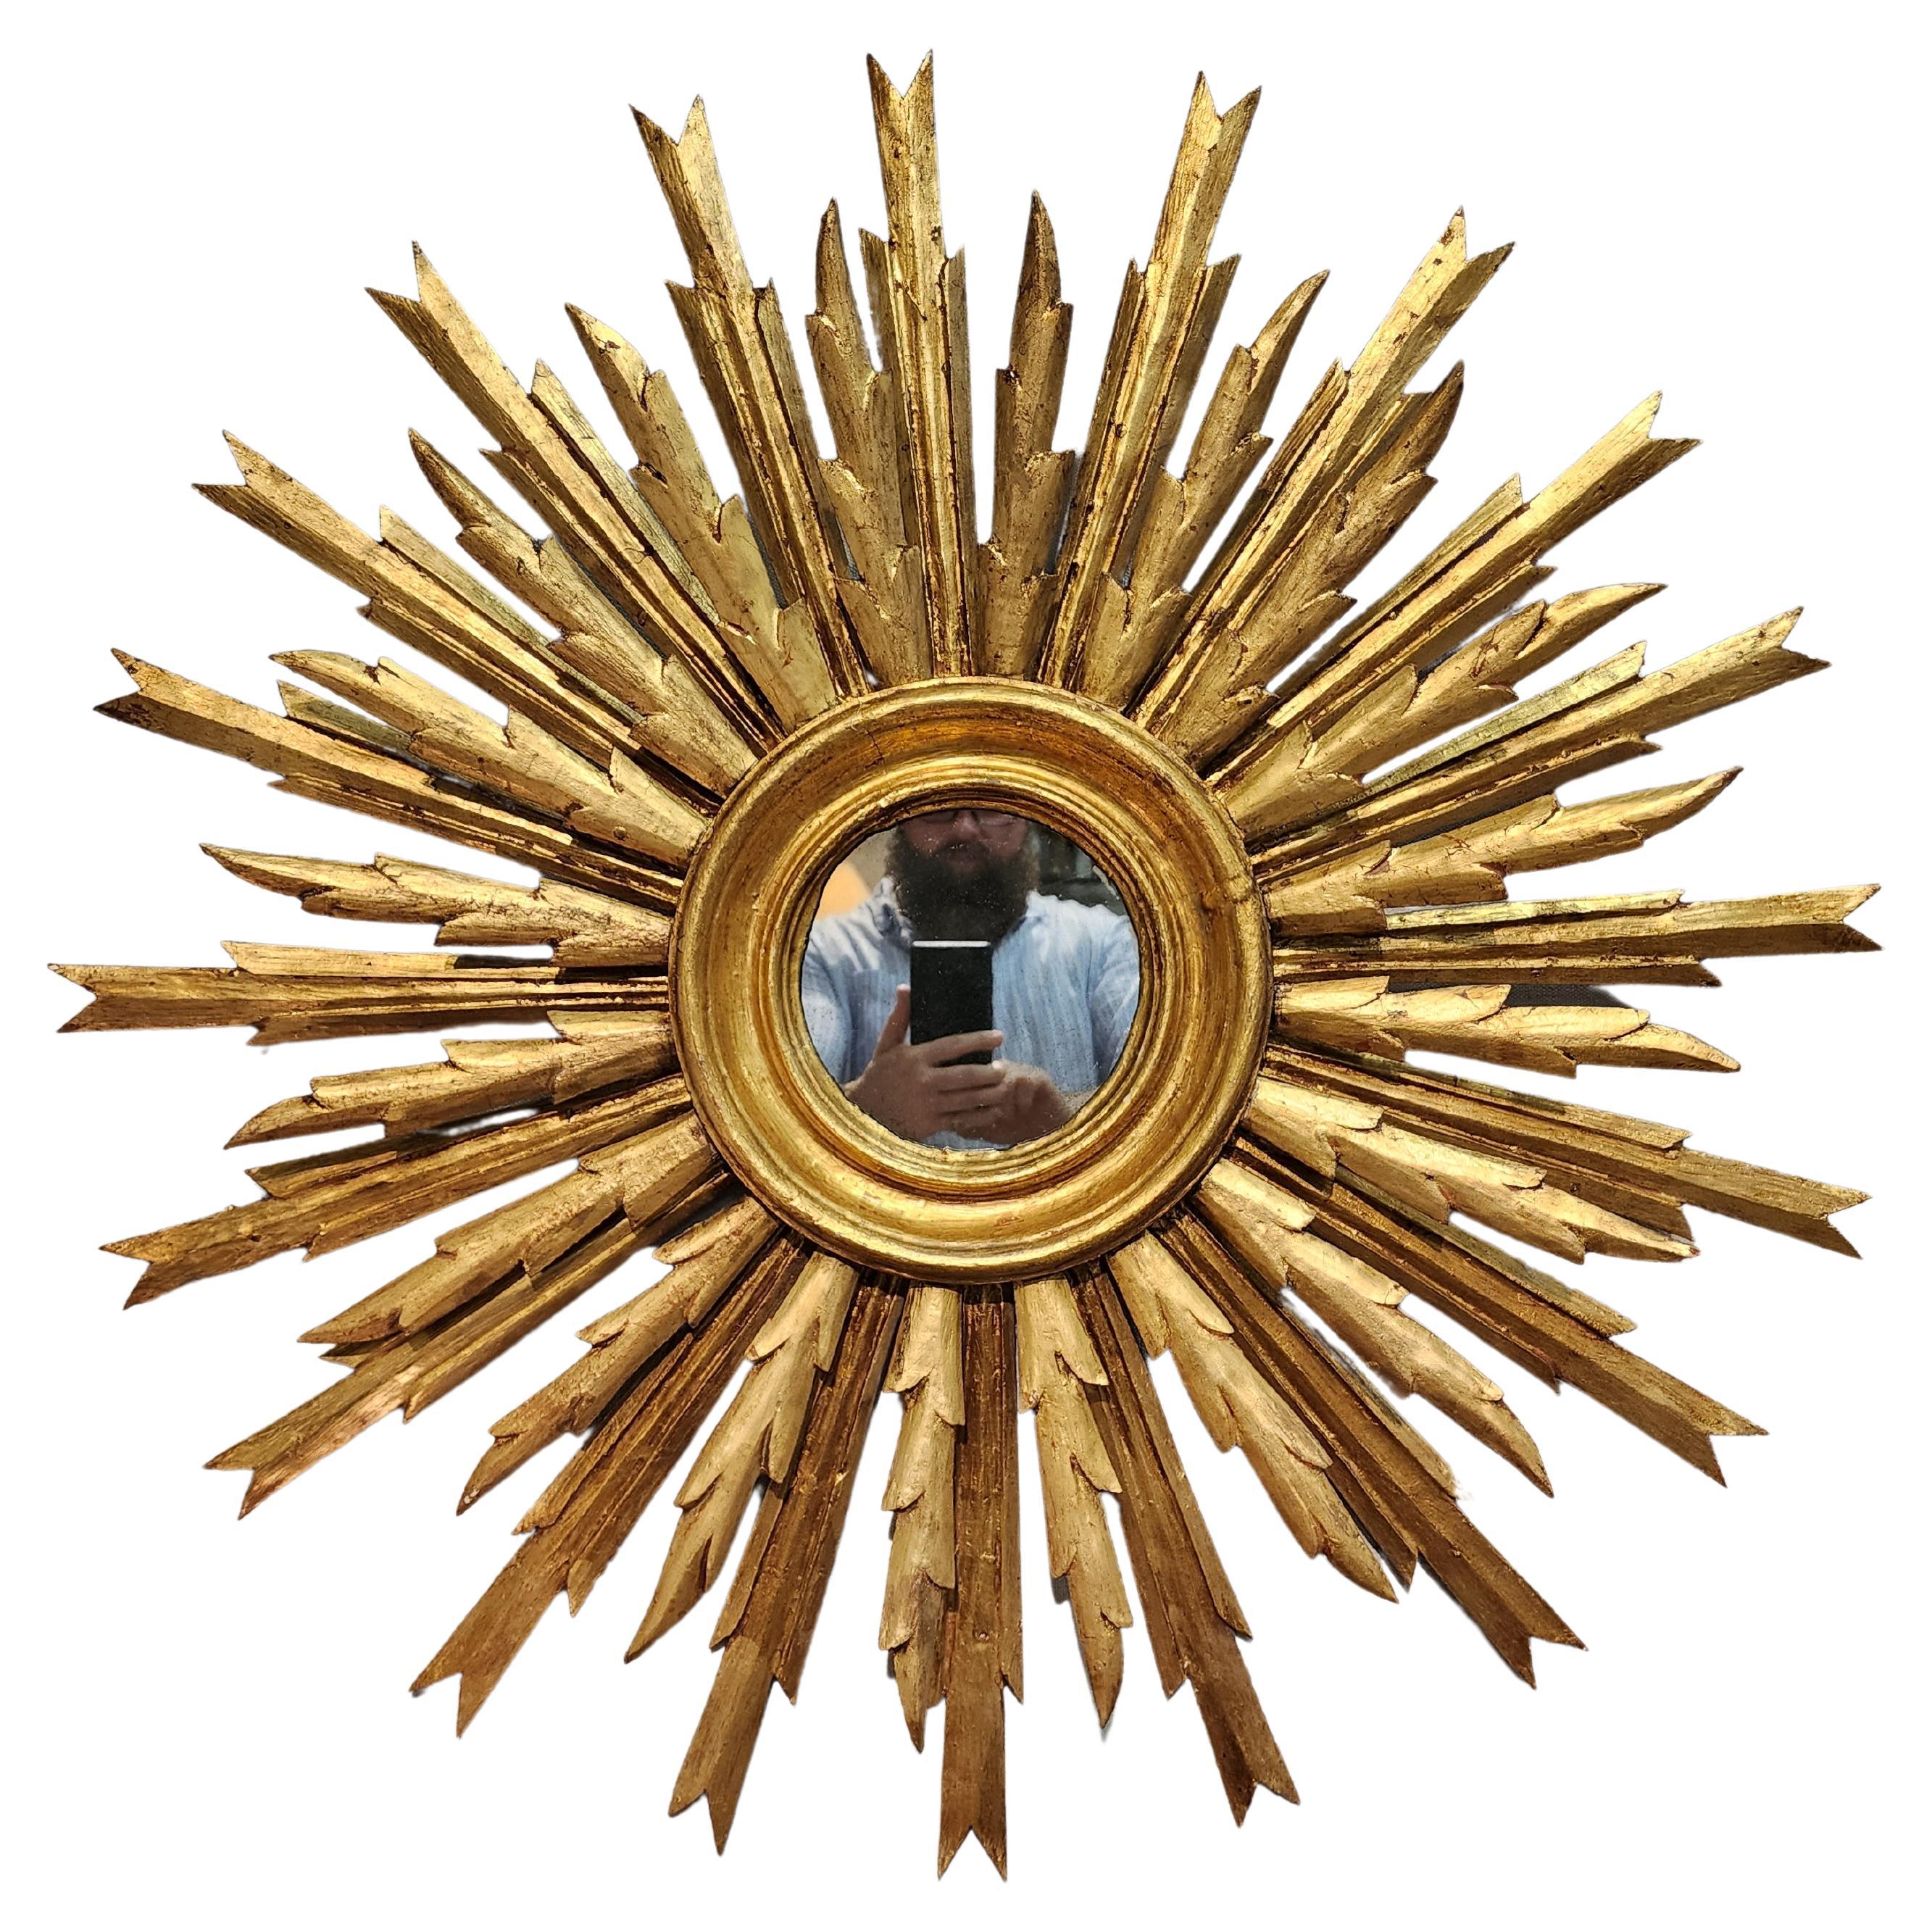 This is a beautiful and very well proportioned sunburst mirror. Made in Spain in the 1930s. This beauty retains the original gold gilded surface and mirror glass. It adds a bit of light and sunshine to any room.
Please be sure to contact me with